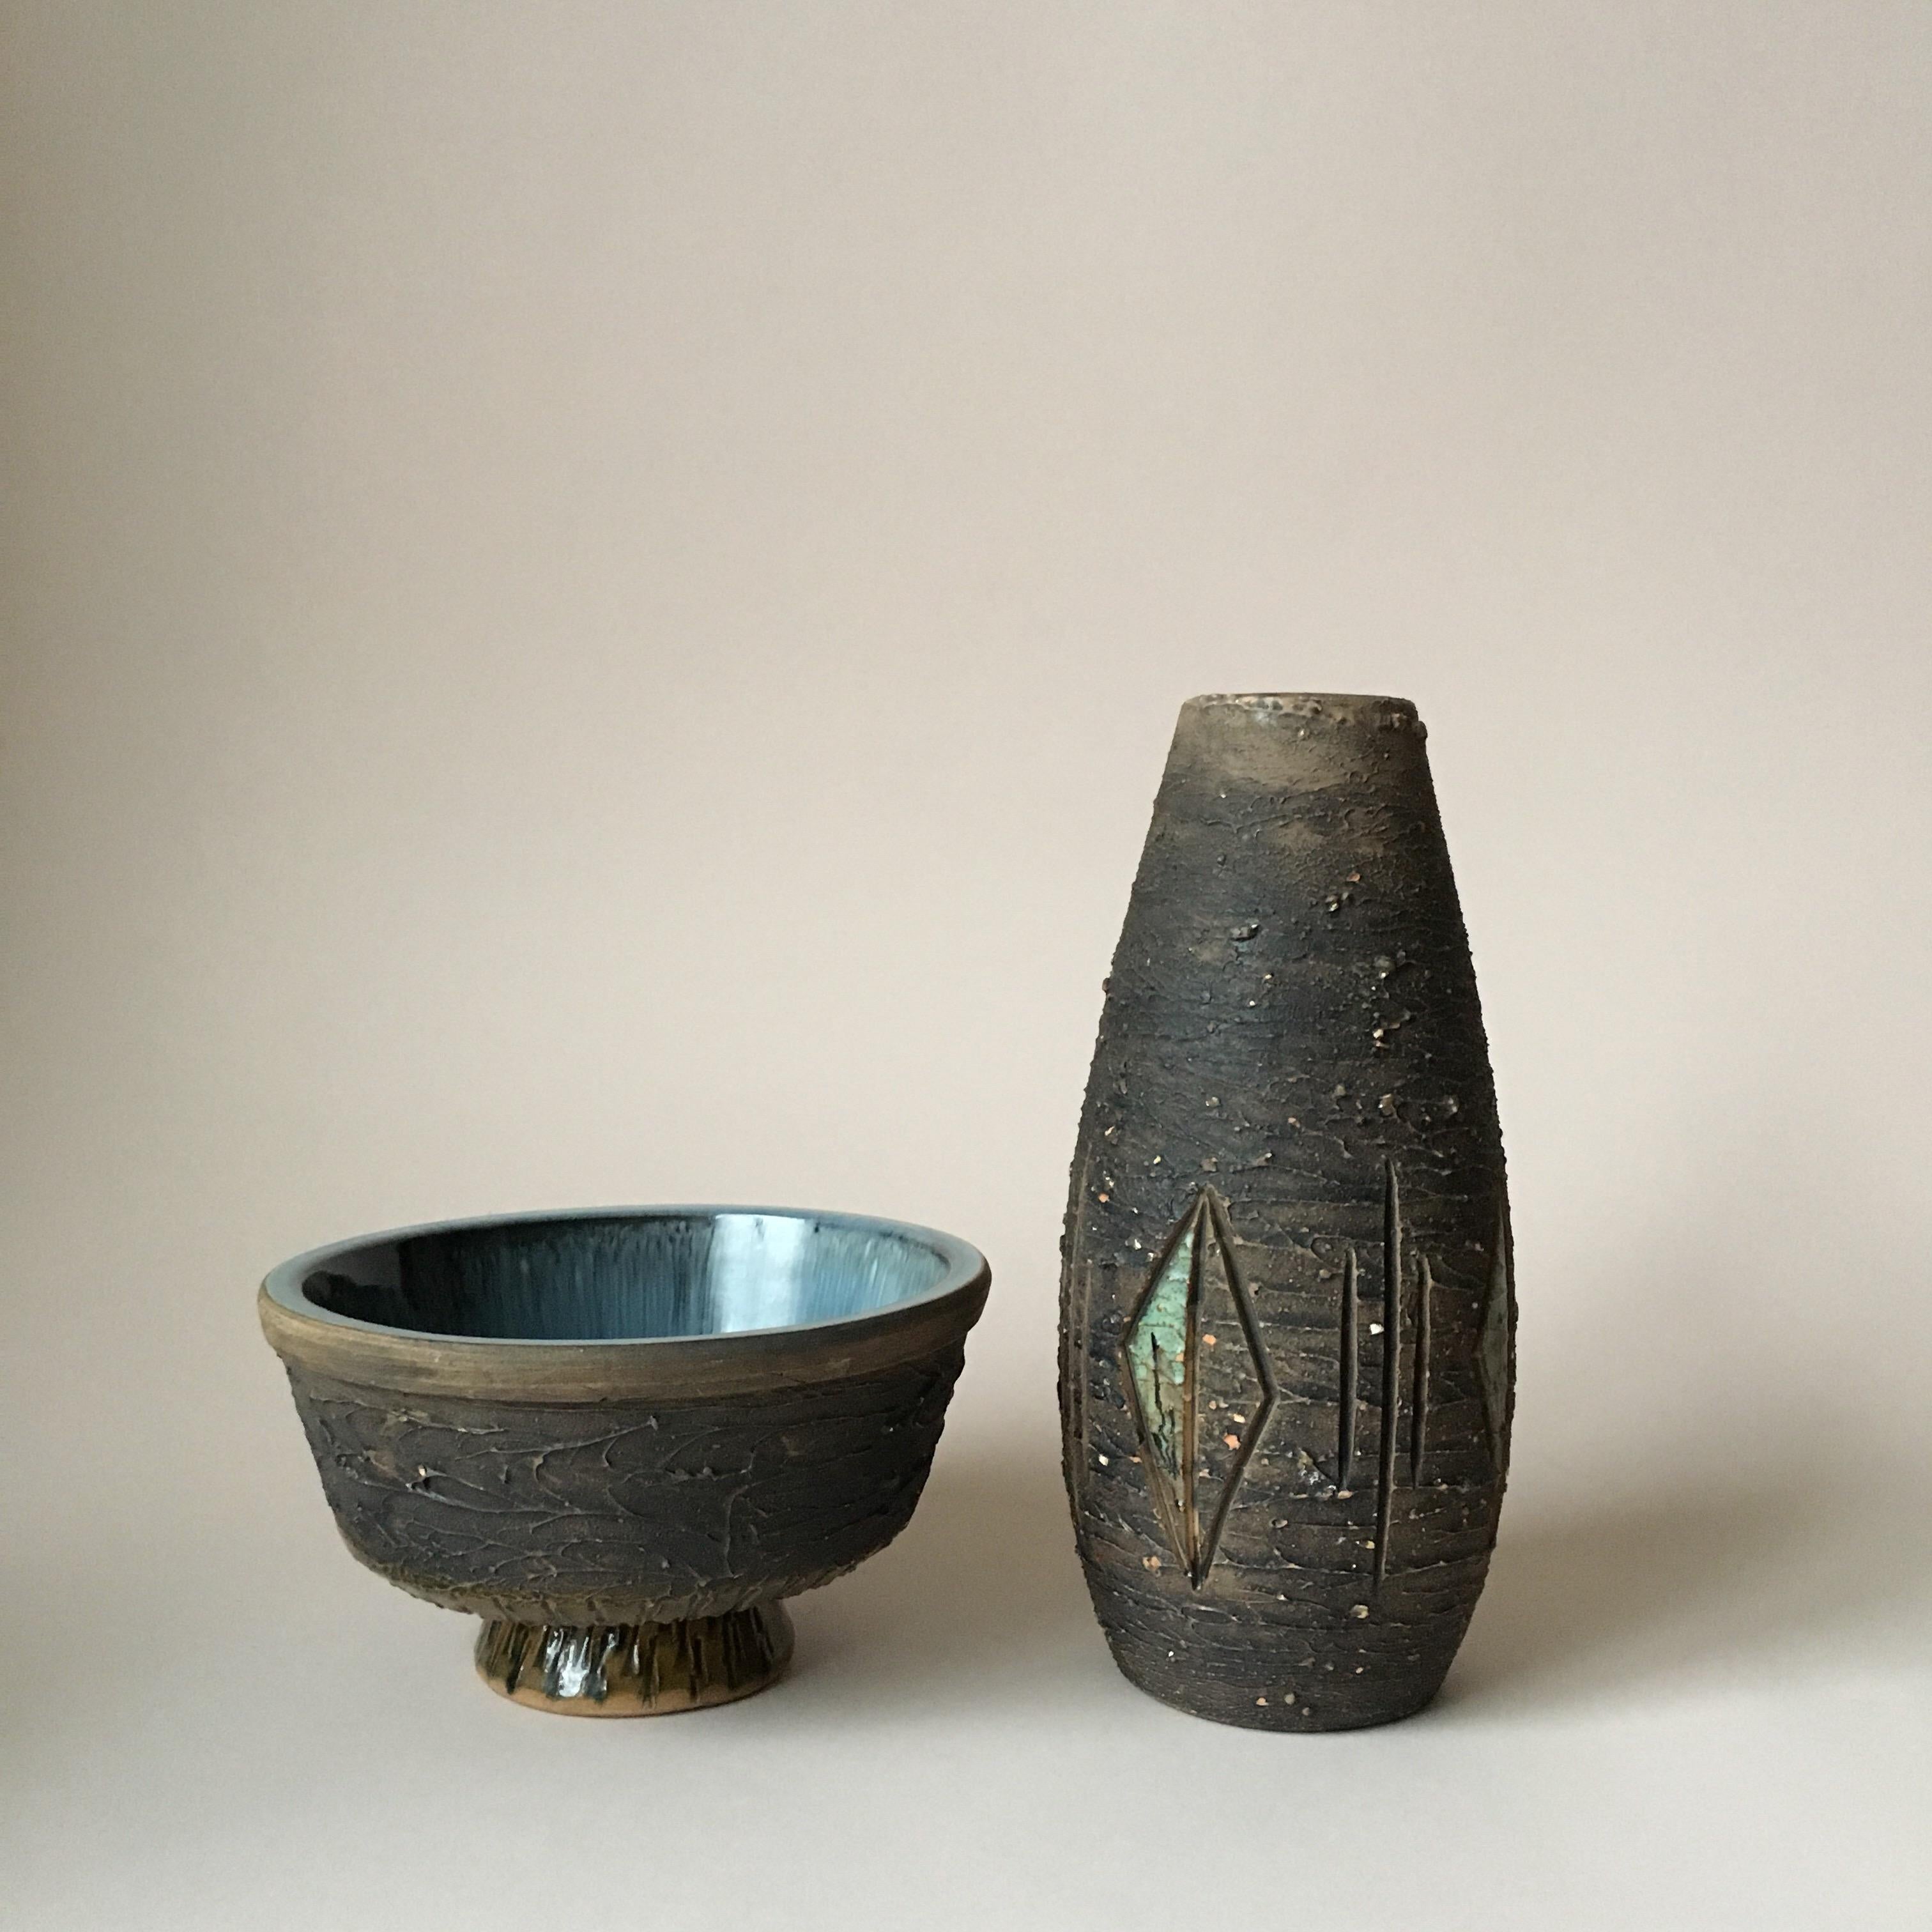 The ceramic bowl features matte blue glaze inside and glossy green-brown glaze on the bottom. The vase has a mint glaze inside and the same color elements on the body. Both items are designed in a rustic style with rough body surface but both have